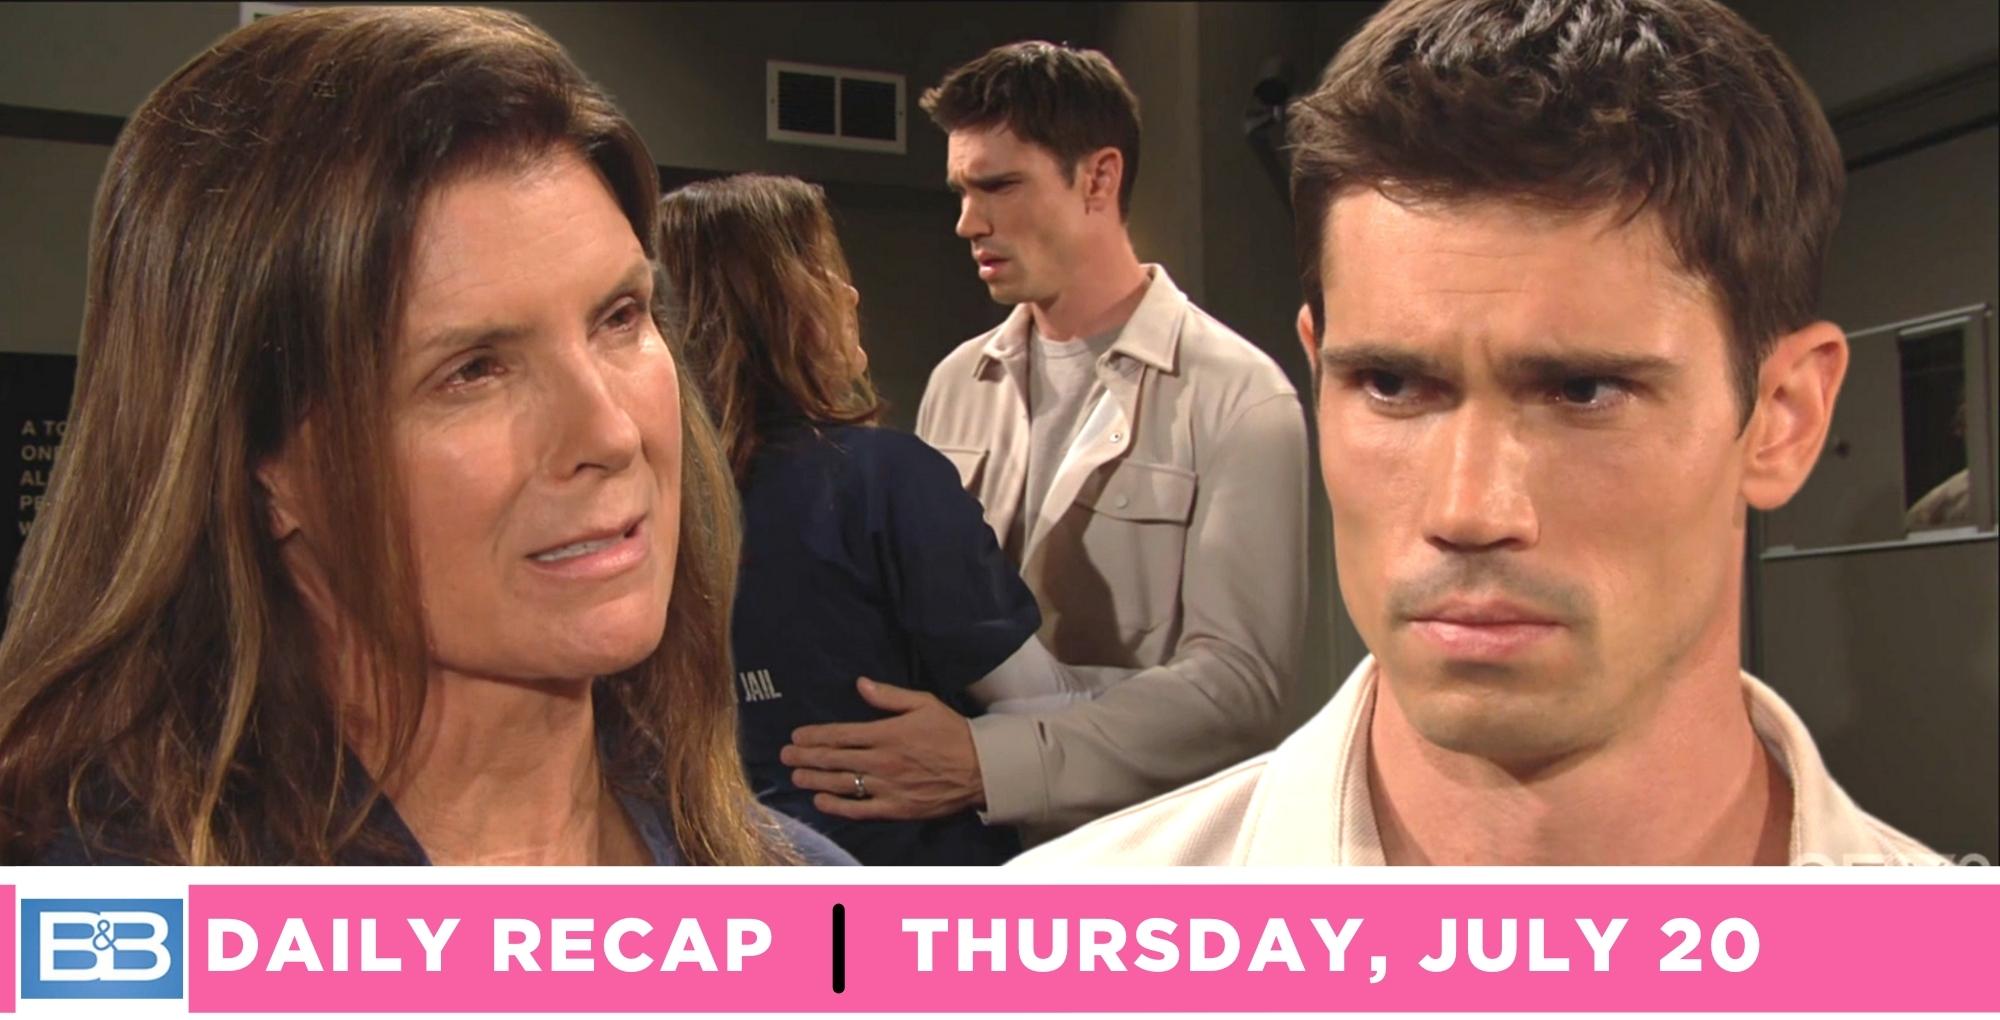 the bold and the beautiful recap for thursday, july 20, 2023, main image finn and sheila hunting, insert images of sheila and finn.